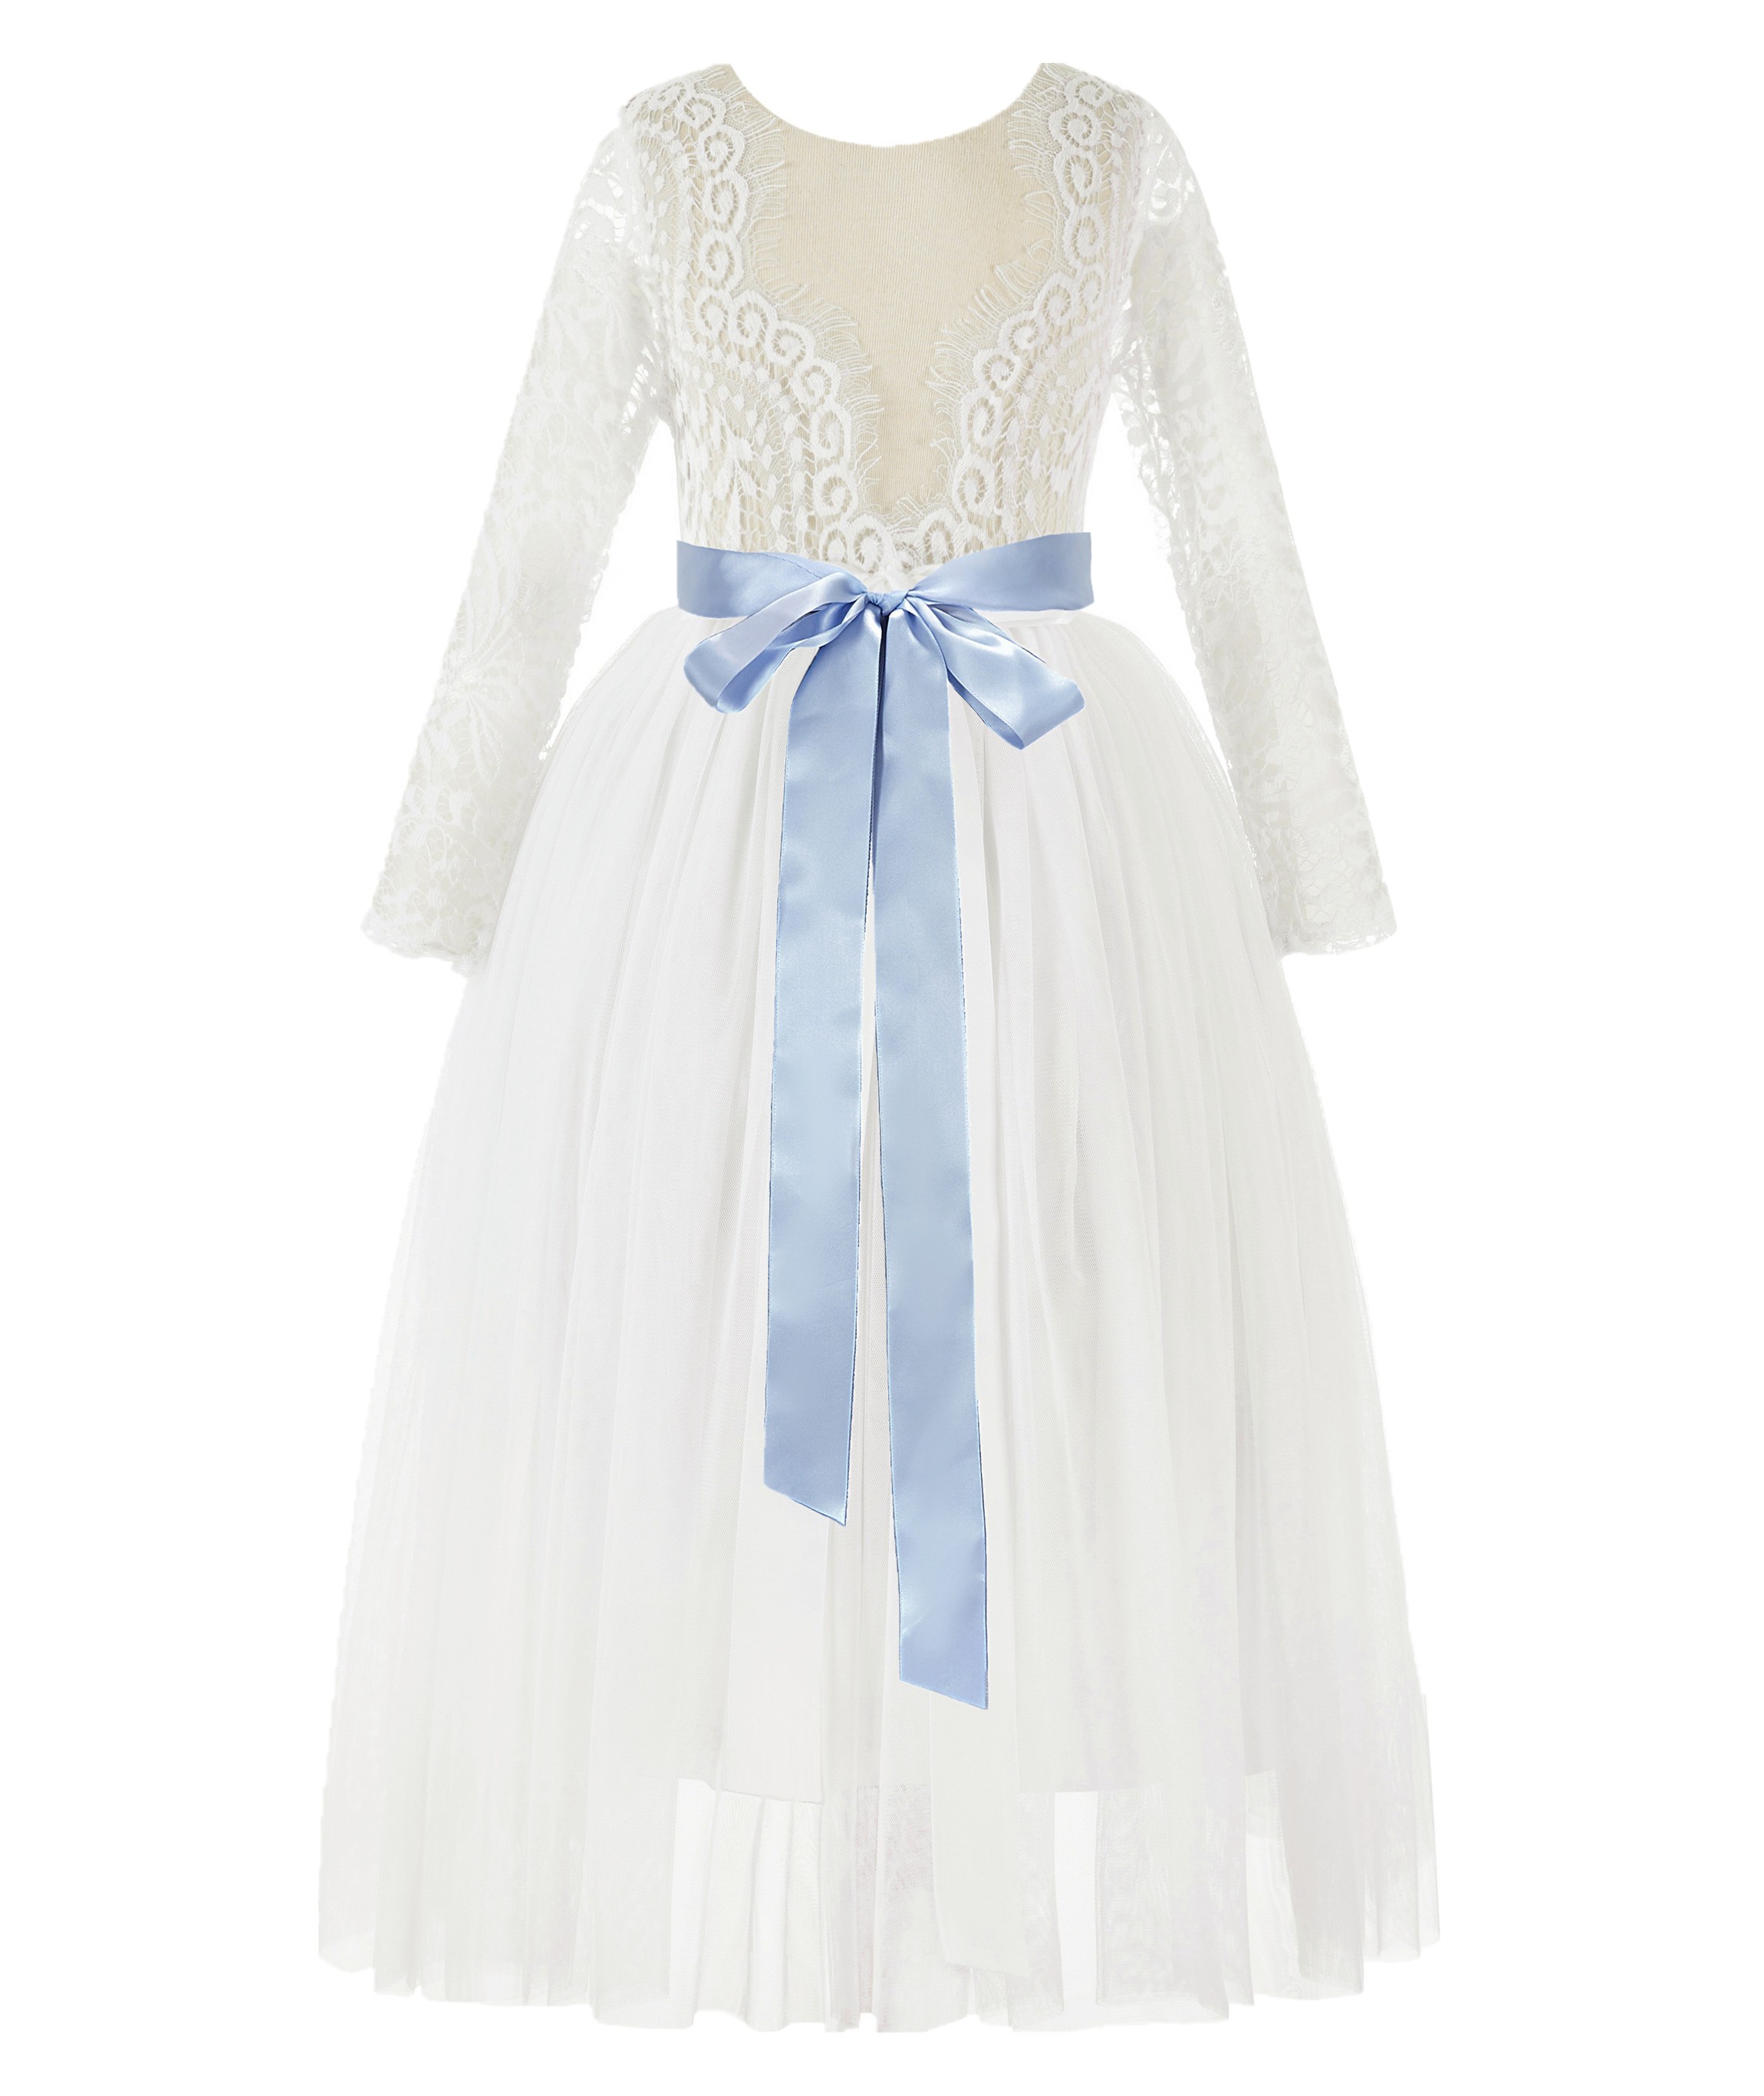 Ivory / Dusty Blue A-Line V-Back Lace Flower Girl Dress with Sleeves 290R